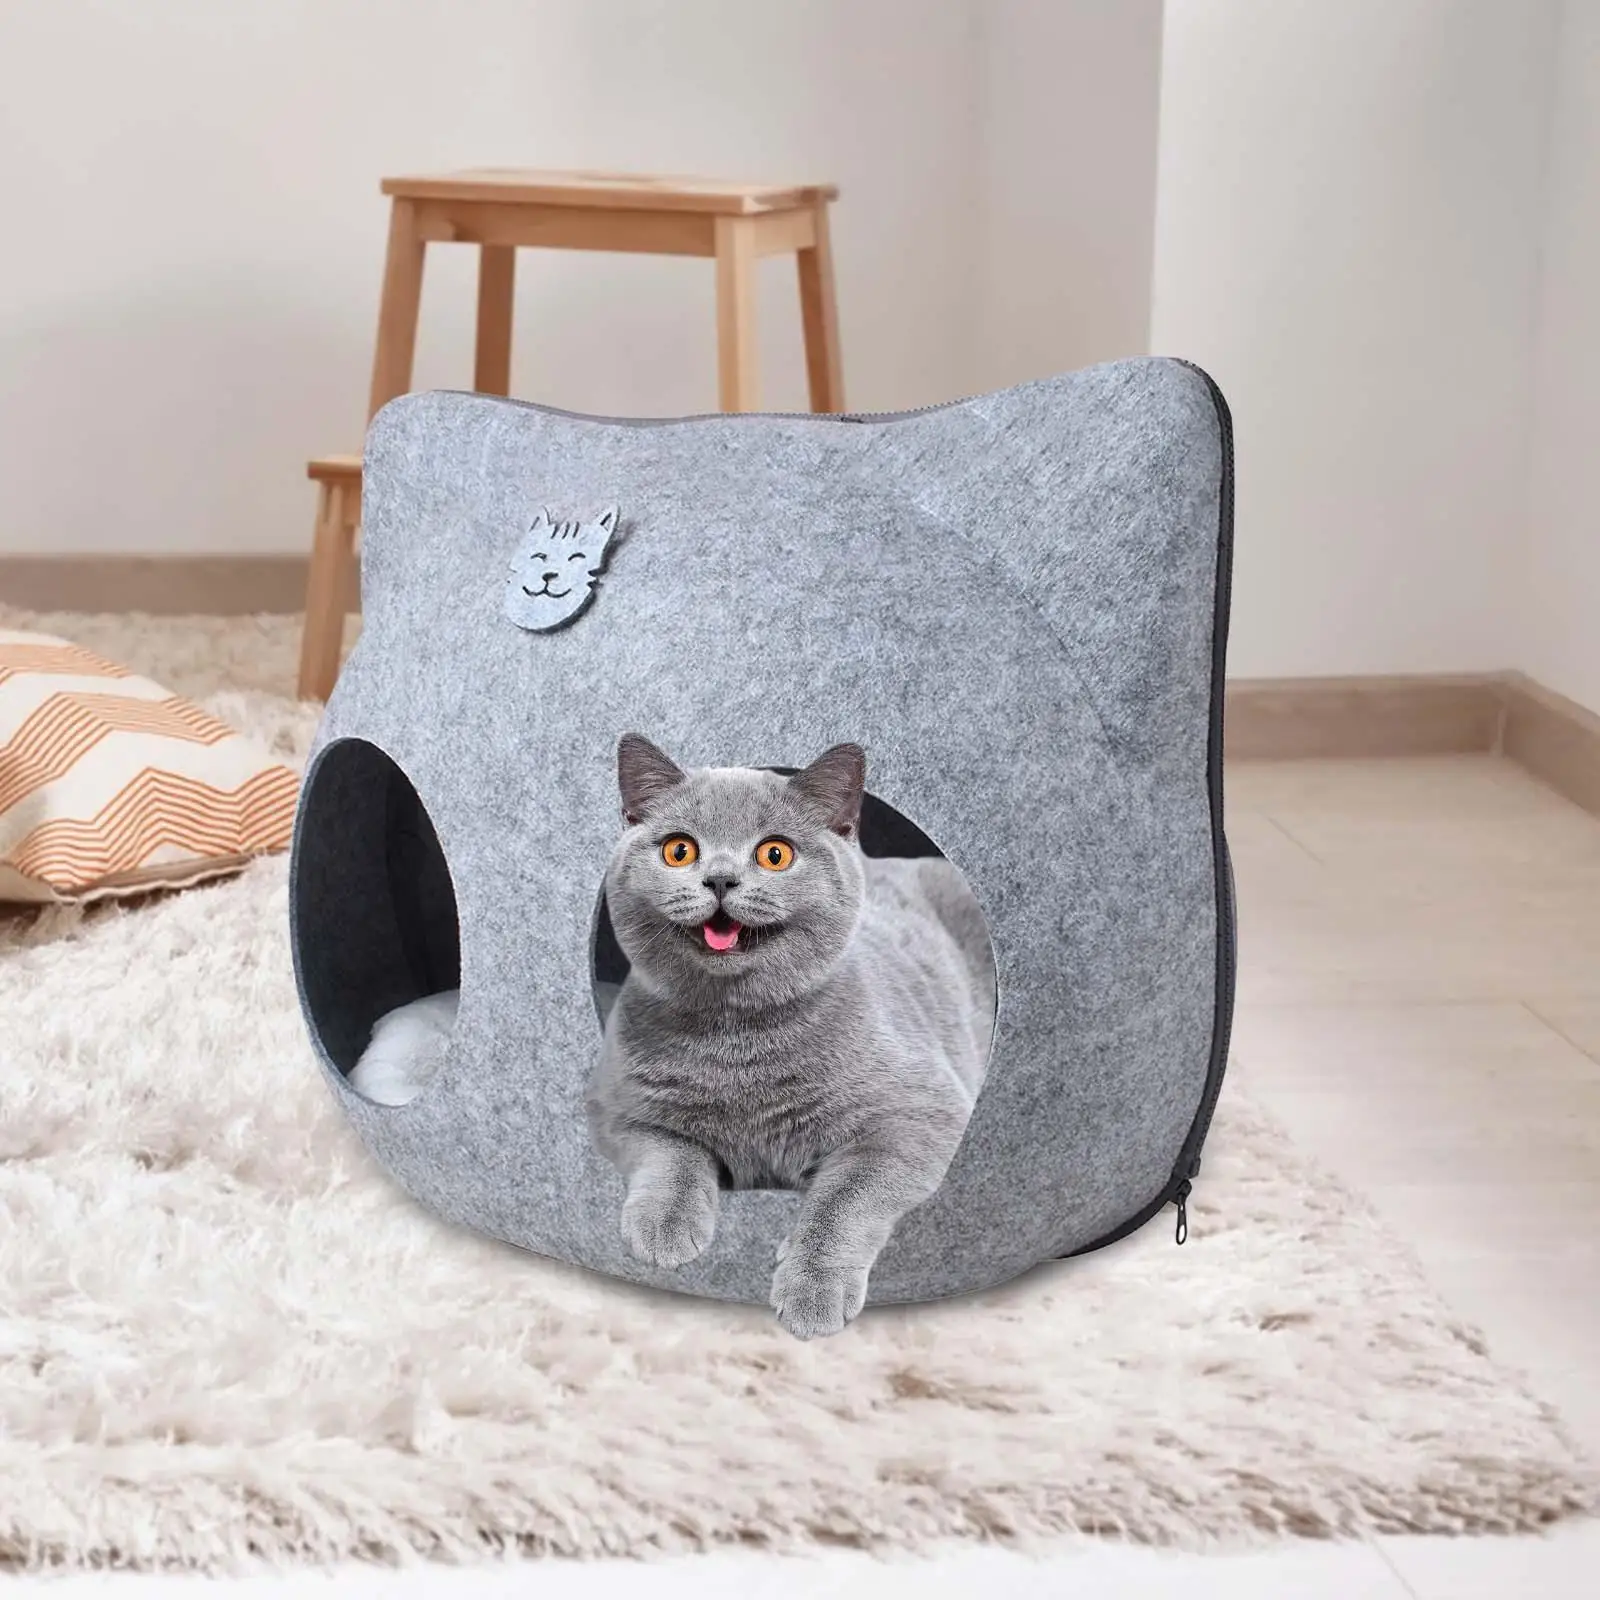 Bed Cute Enclosed Cat Bed Felt Cat Bed Cave Toy Detachable Cat Nest Pet Sleeping Bed Washable for Dogs Cat Home Winter